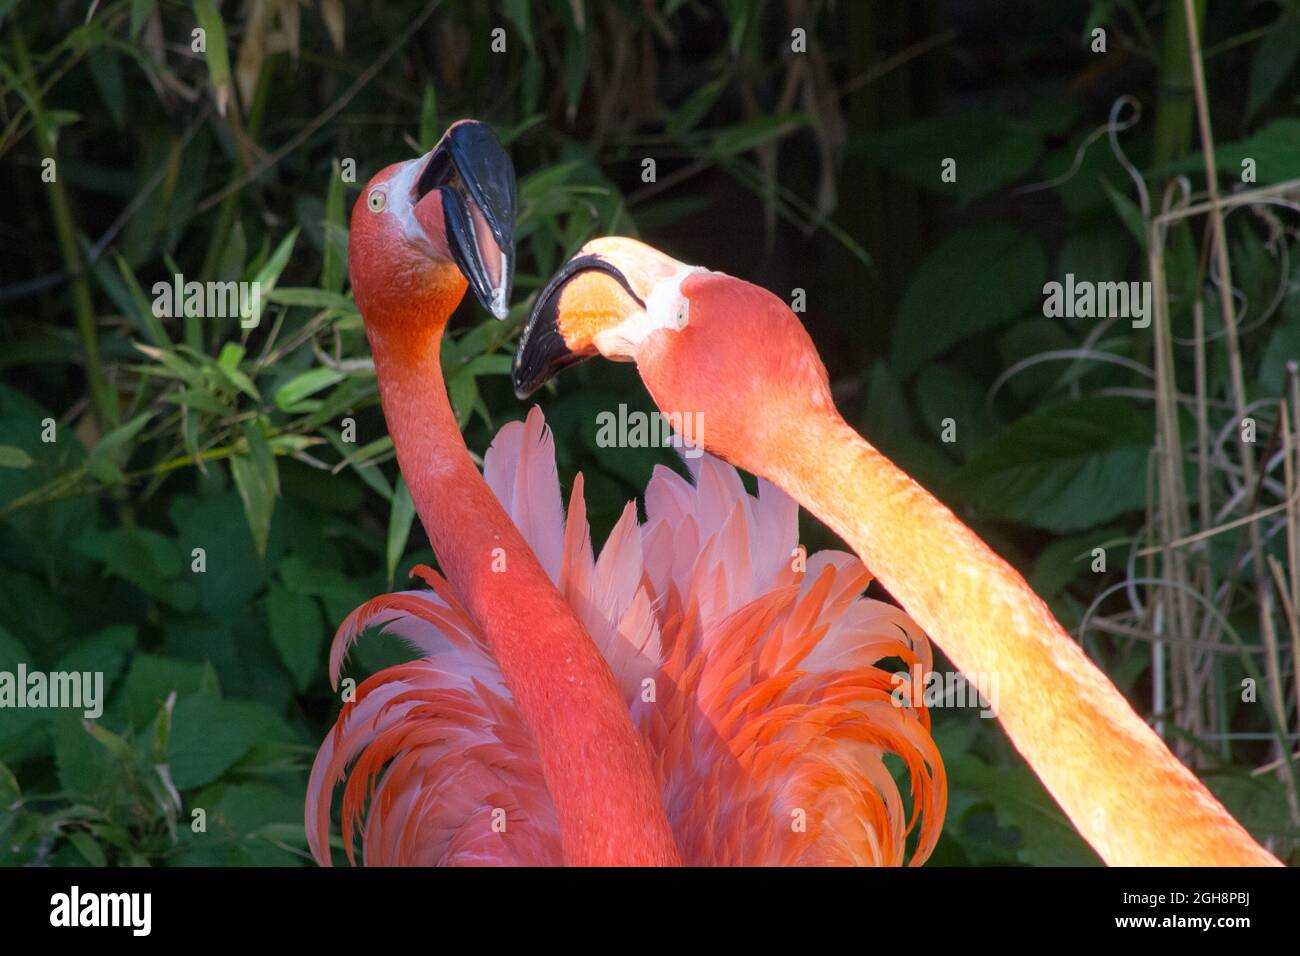 Two flamingos quarreling and fighting Stock Photo